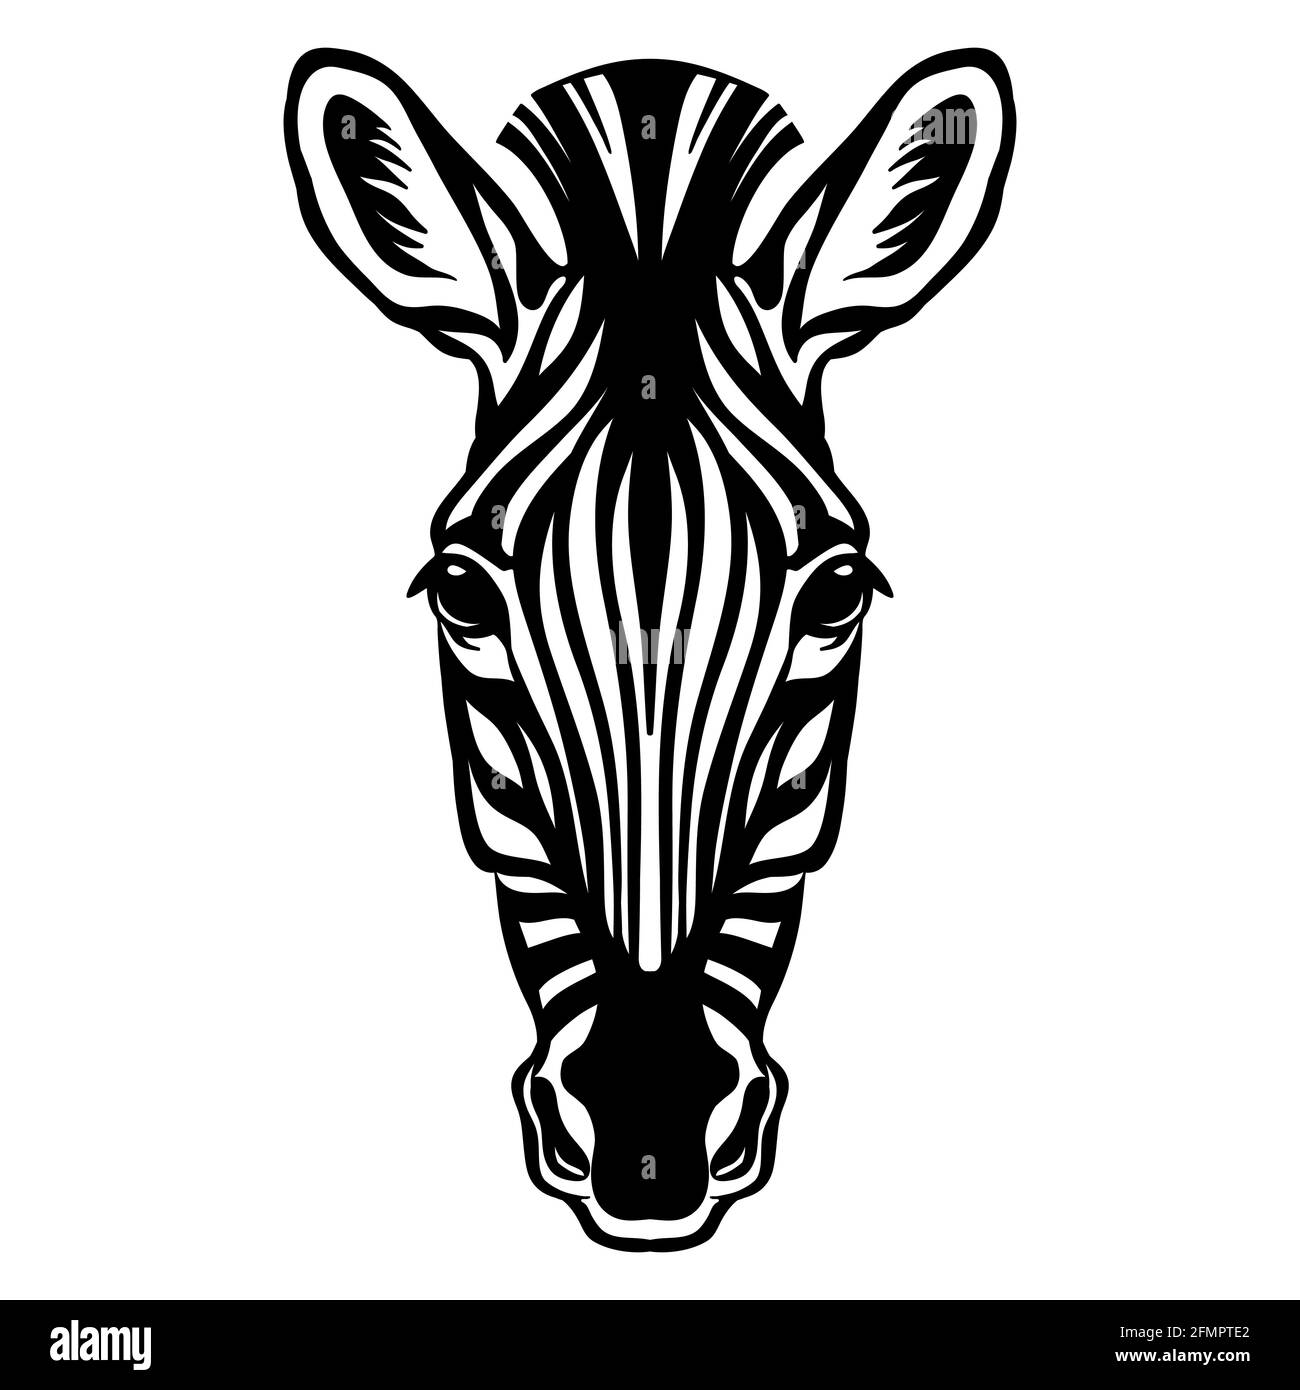 VL Zebra Letter Logo Design With Black And White Stripes Vector Royalty  Free SVG, Cliparts, Vectors, and Stock Illustration. Image 76581272.